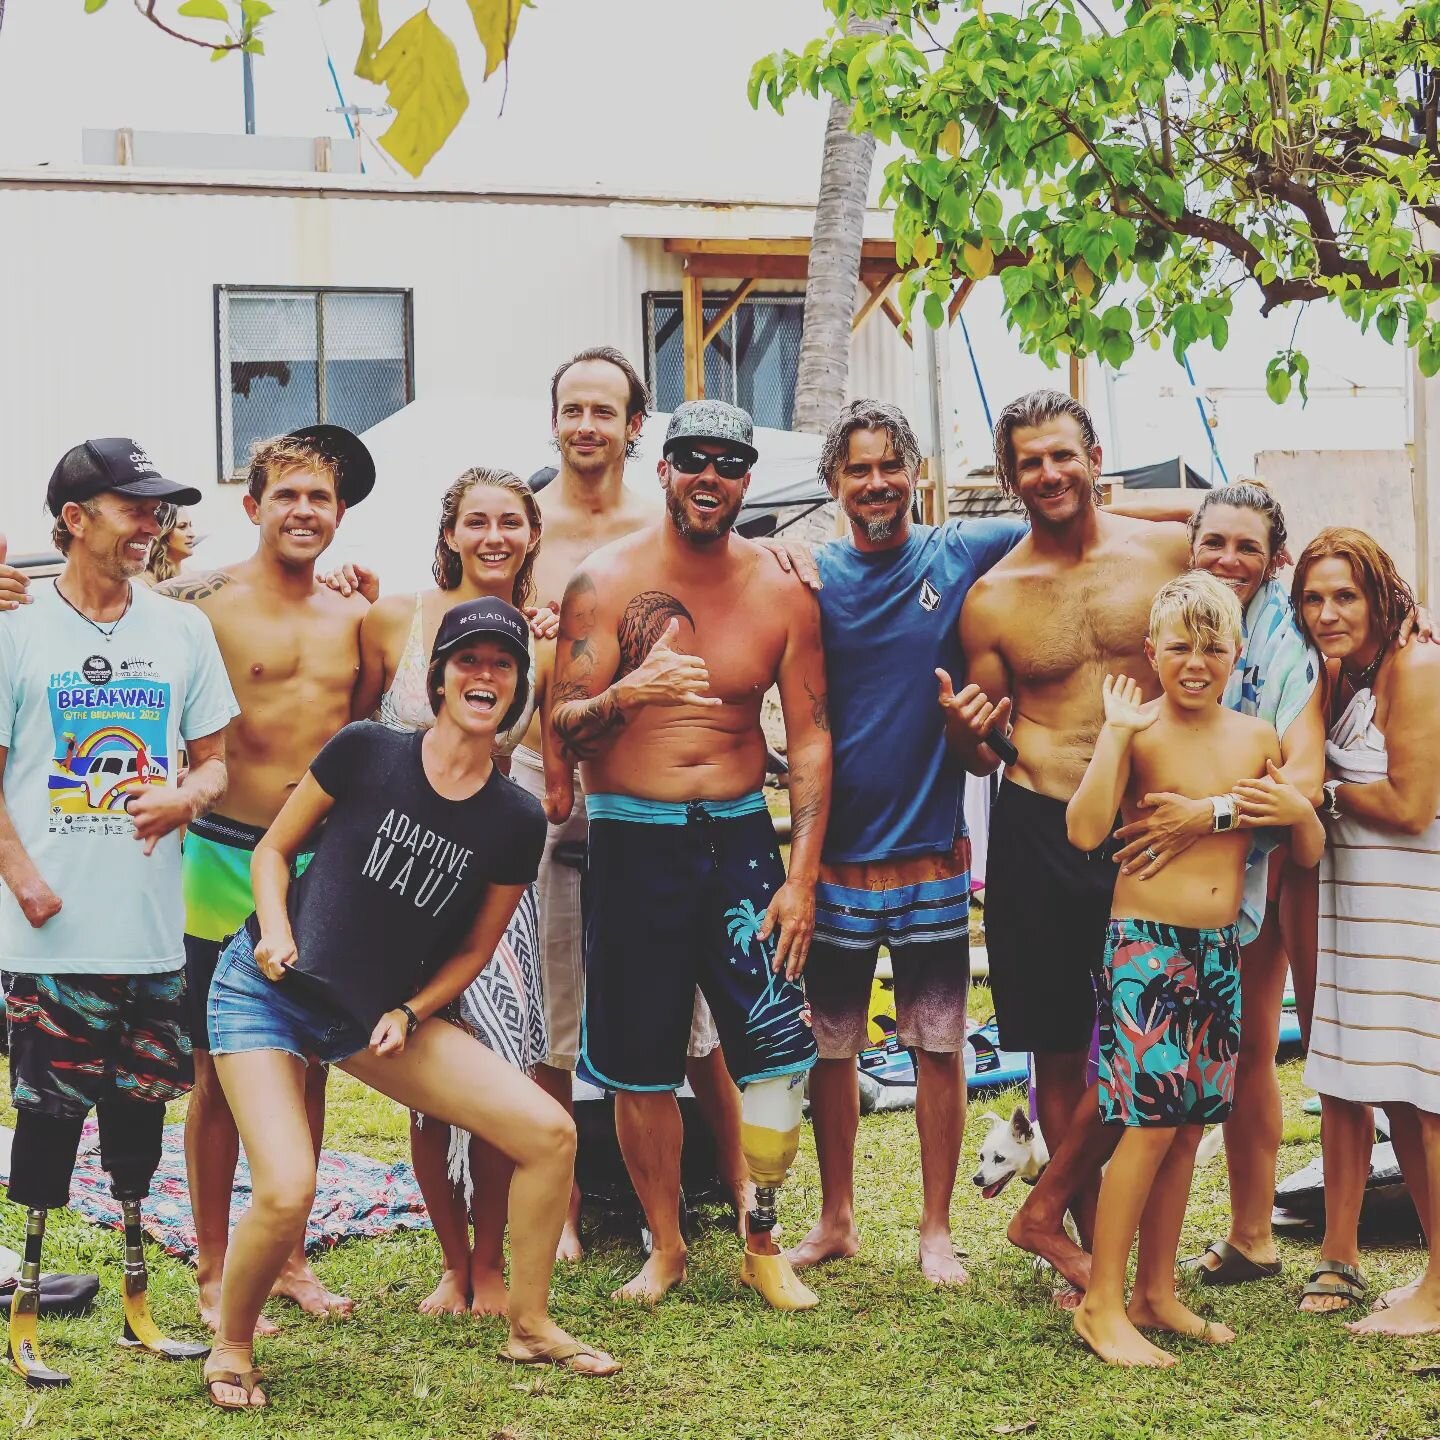 It really does feel like family sometimes. Always adding to the crew. Get in here! This was at our last @hsamaui #Surf contest at Lahaina Harbor. (ID: some of our  ohana gathered together, smiling and posing for the camera) #KeleaCrew #AdaptiveSports